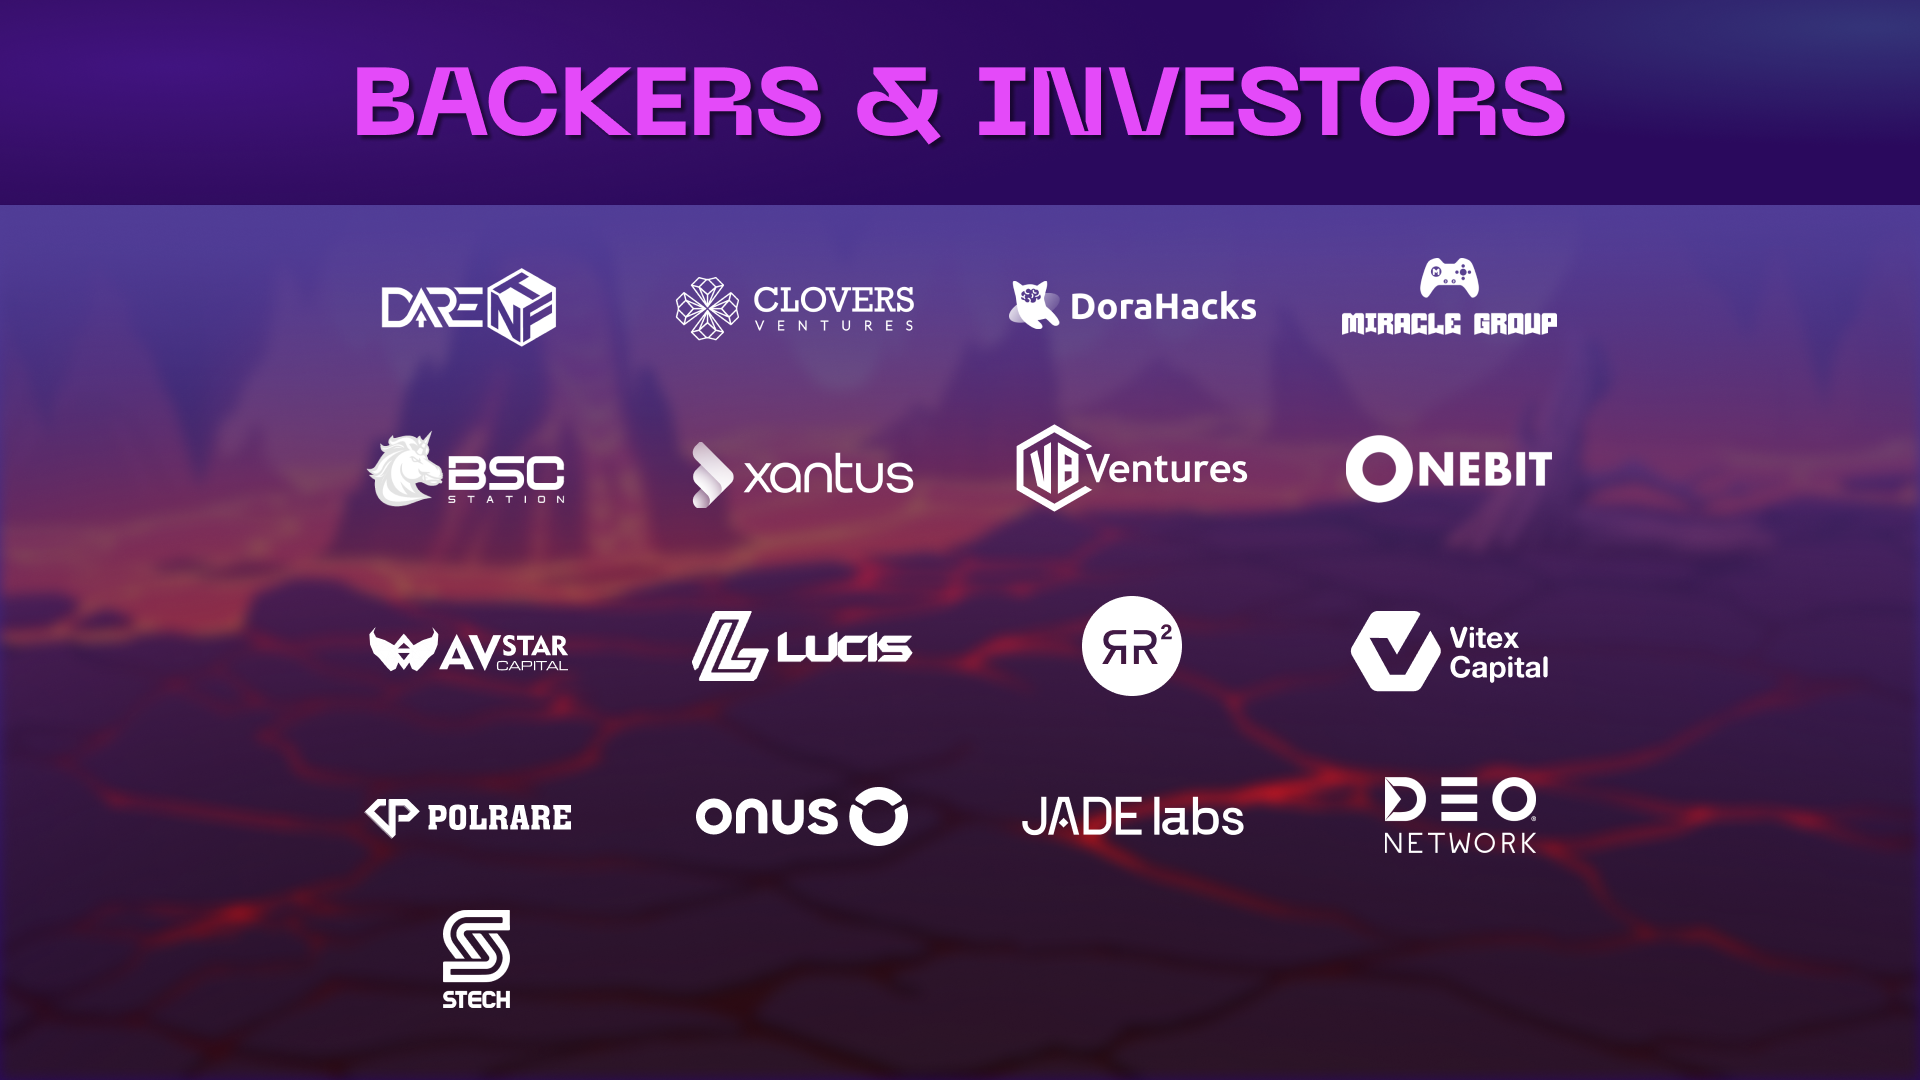 Backers and Investors